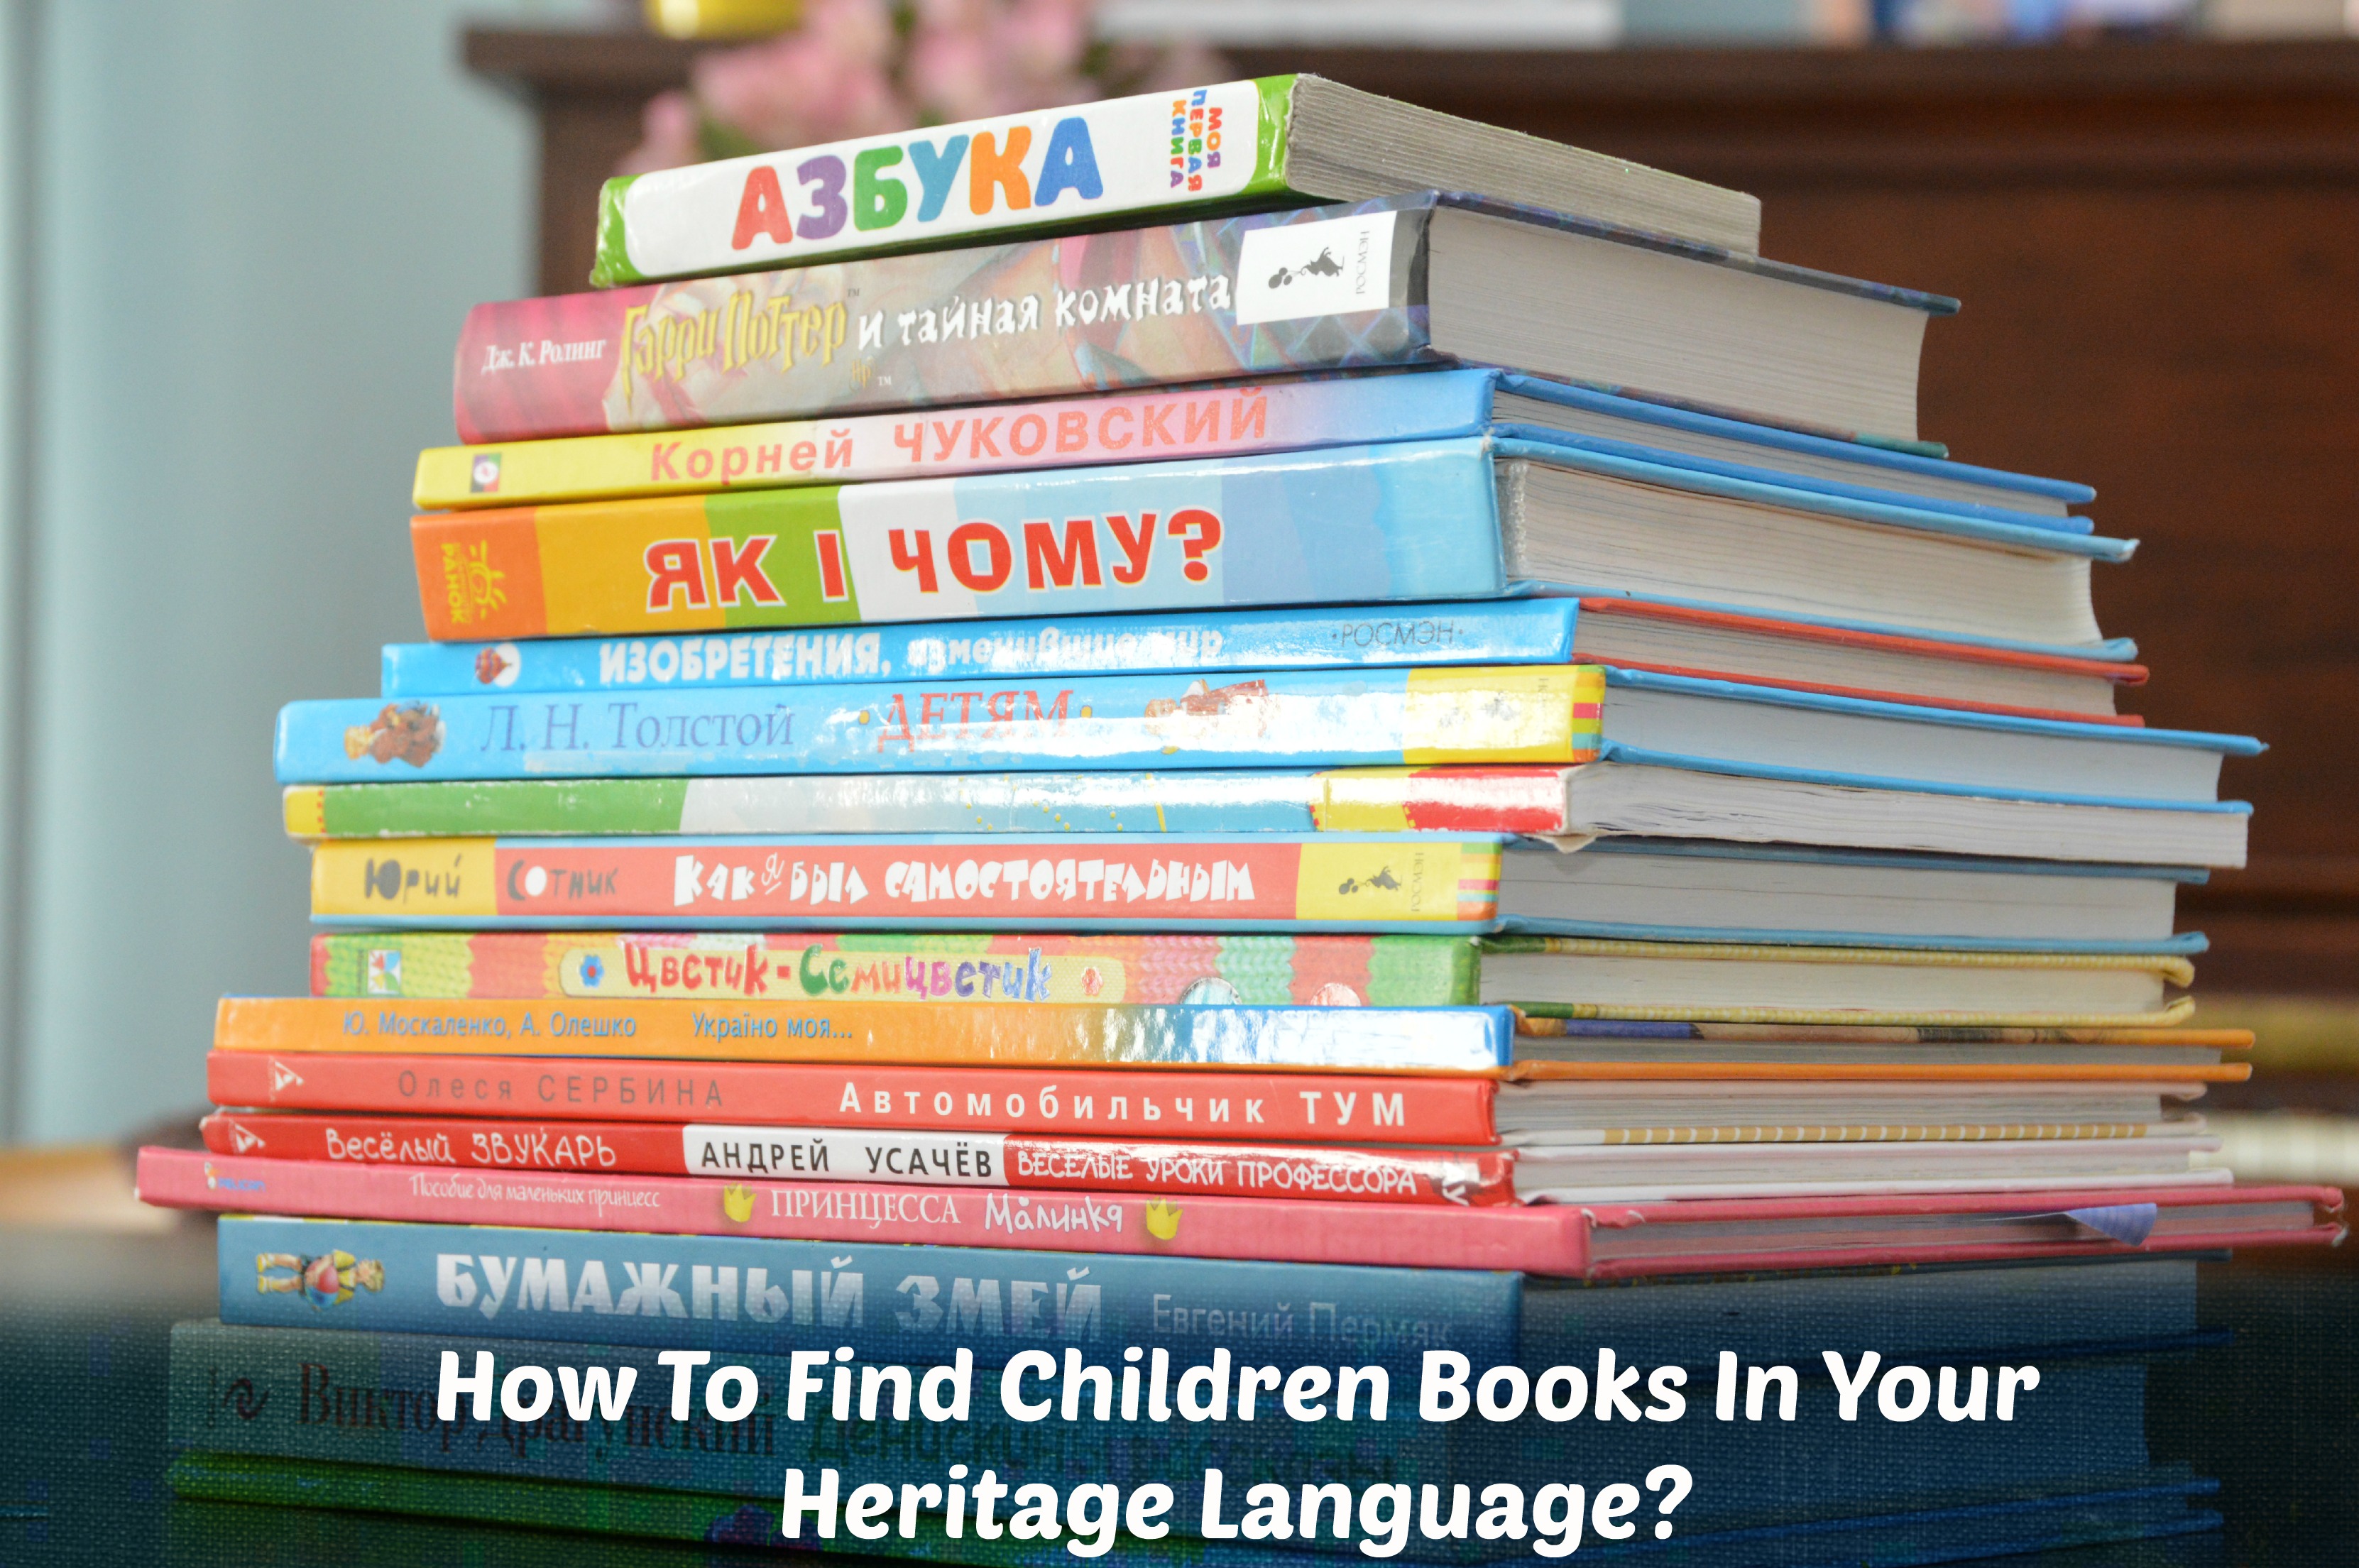 How To Find Children Books In Your Heritage Language?